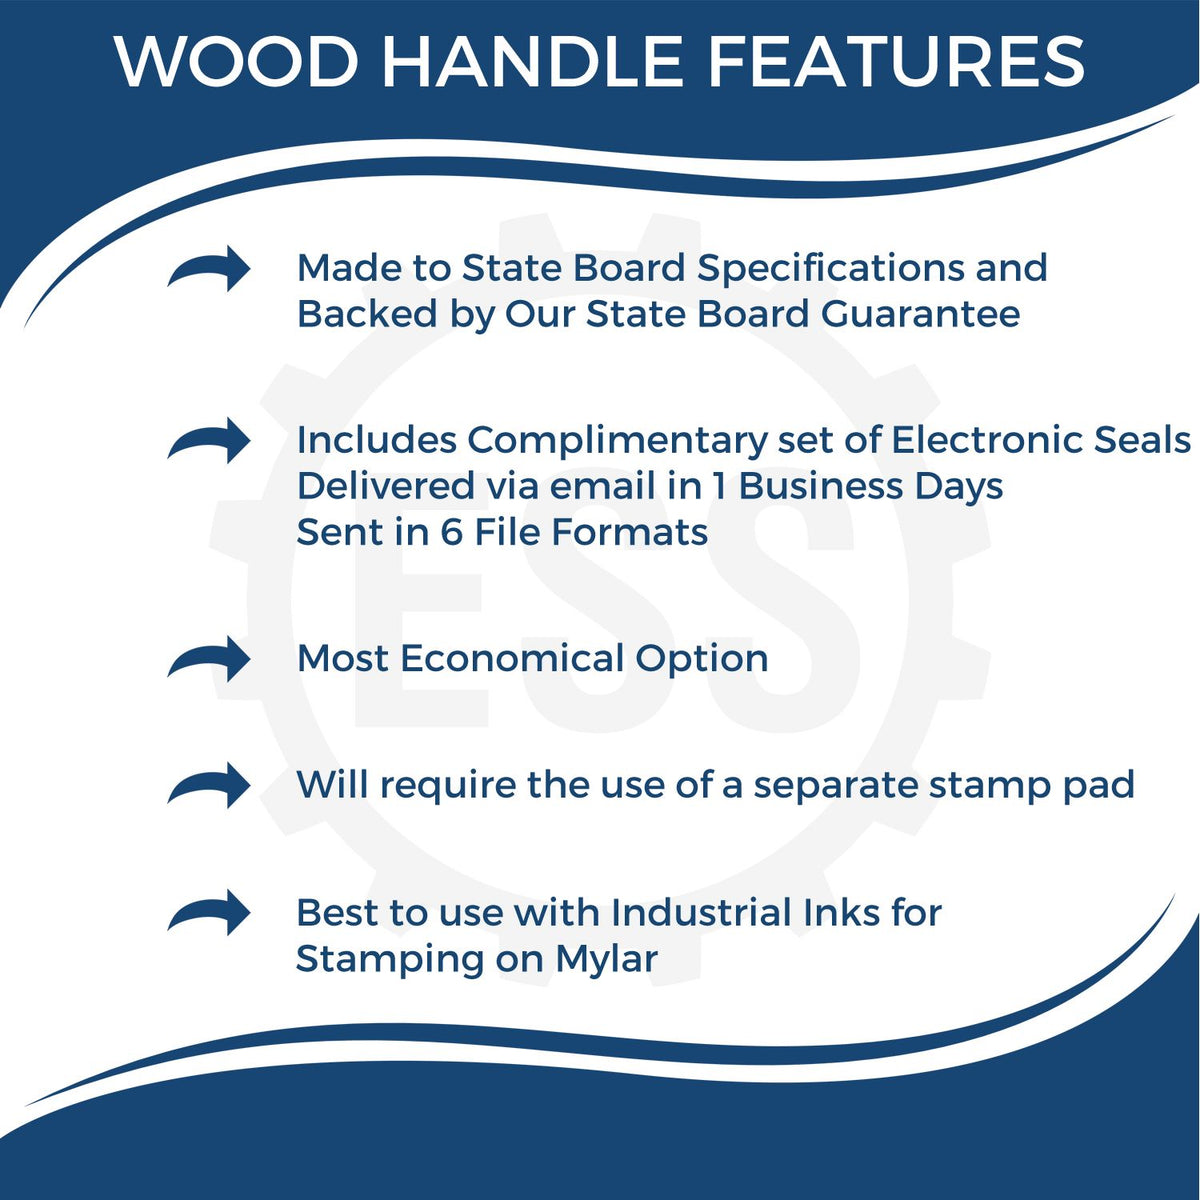 A picture of an infographic highlighting the selling points for the Wooden Handle Georgia Rectangular Notary Public Stamp